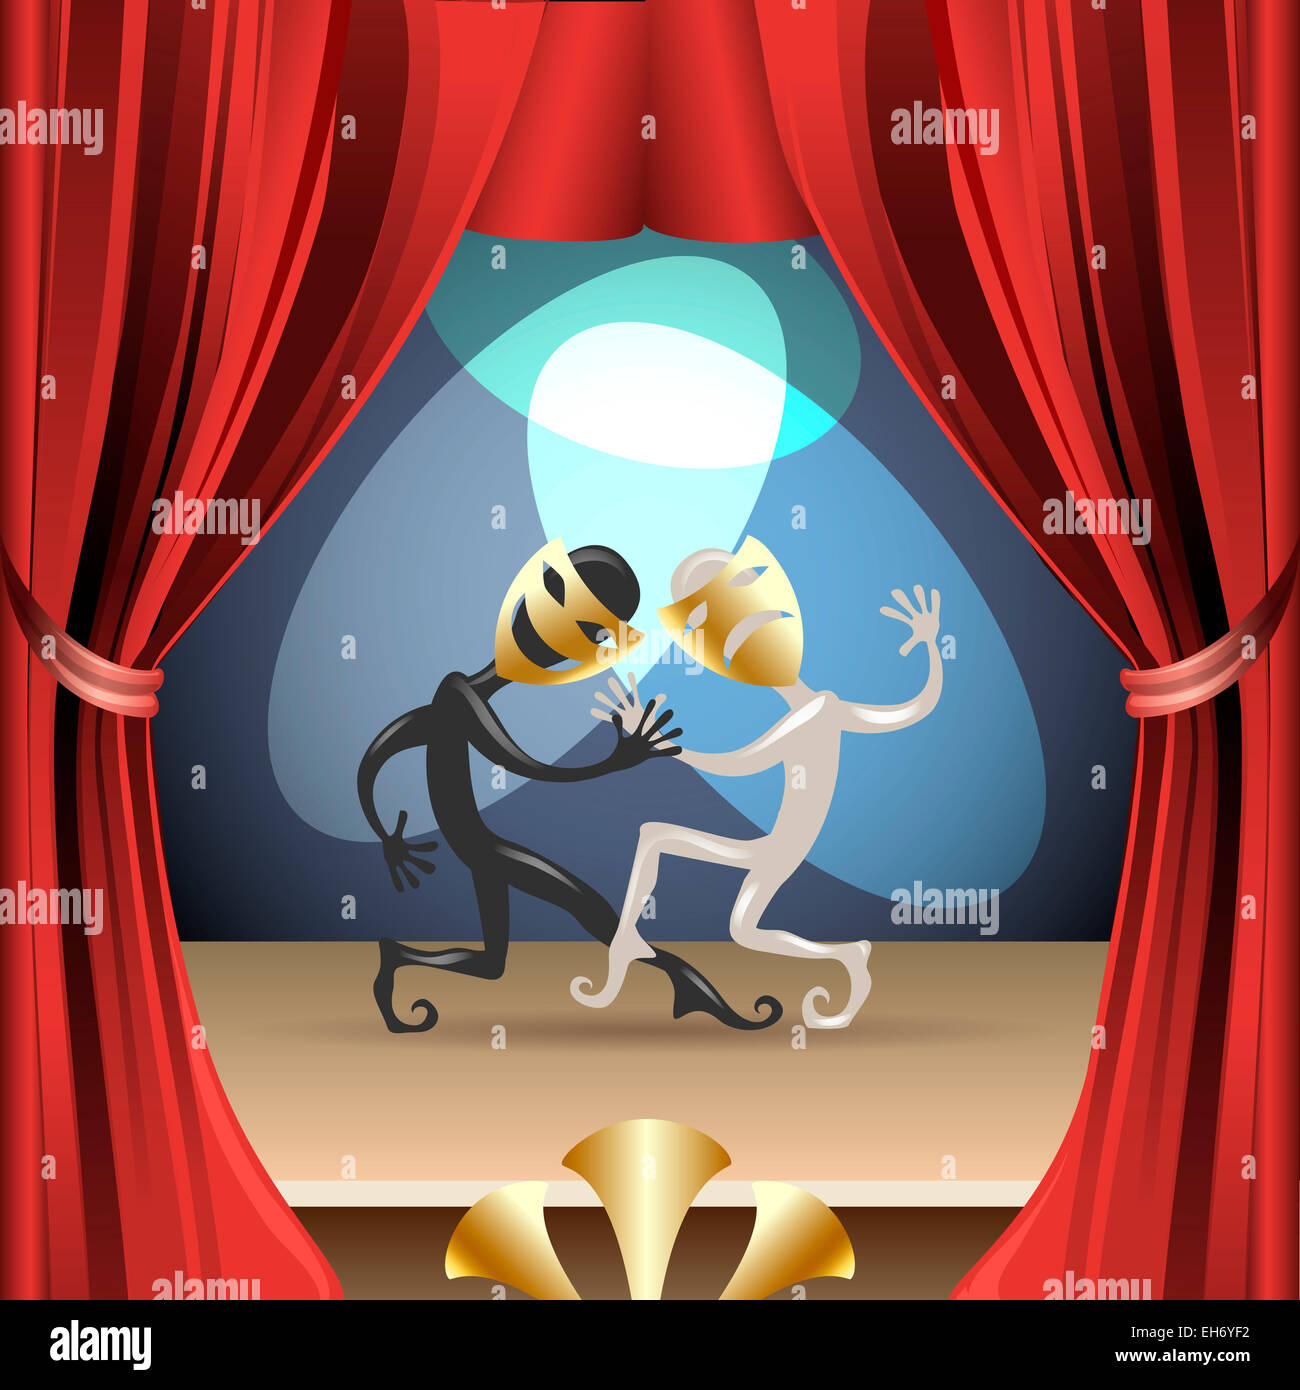 Illustration of two actors in classic masks on theater stage during performance drawn in cartoon style Stock Photo